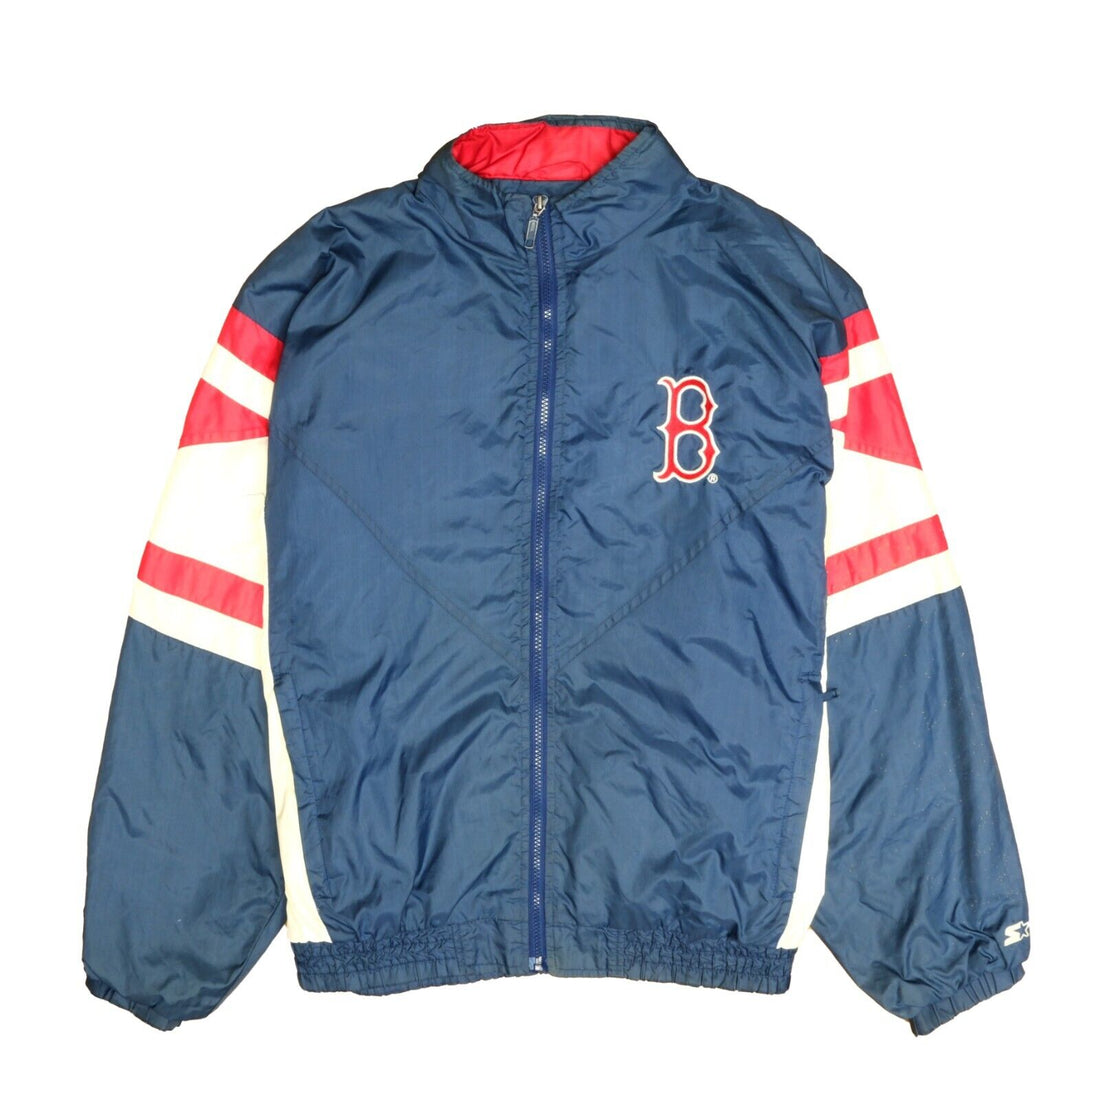 Starter Jackets. This is not my image but this jacket is what I owned in  middle school! : r/nostalgia